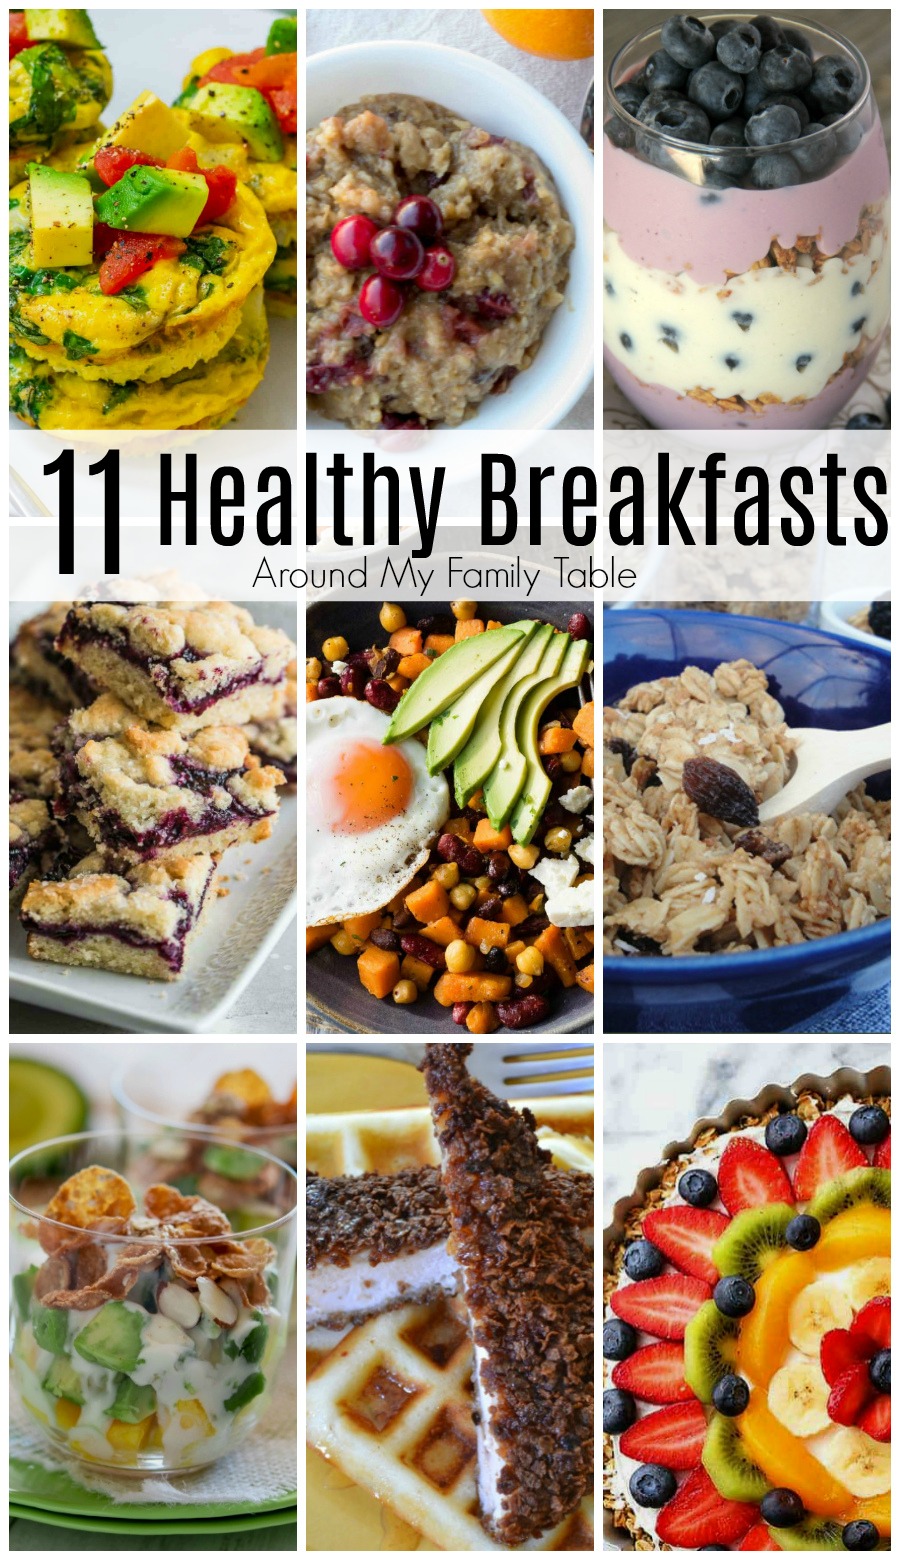 Don’t worry about giving up the convenience of that boxed, sugary cereal.  With a little planning ahead, these homemade, Healthy Breakfast Ideas will be pretty simple to make, even on those crazy busy mornings when you need to get the kids to school. #breakfasts #healthybreakfast #backtoschoolbreakfast via @slingmama